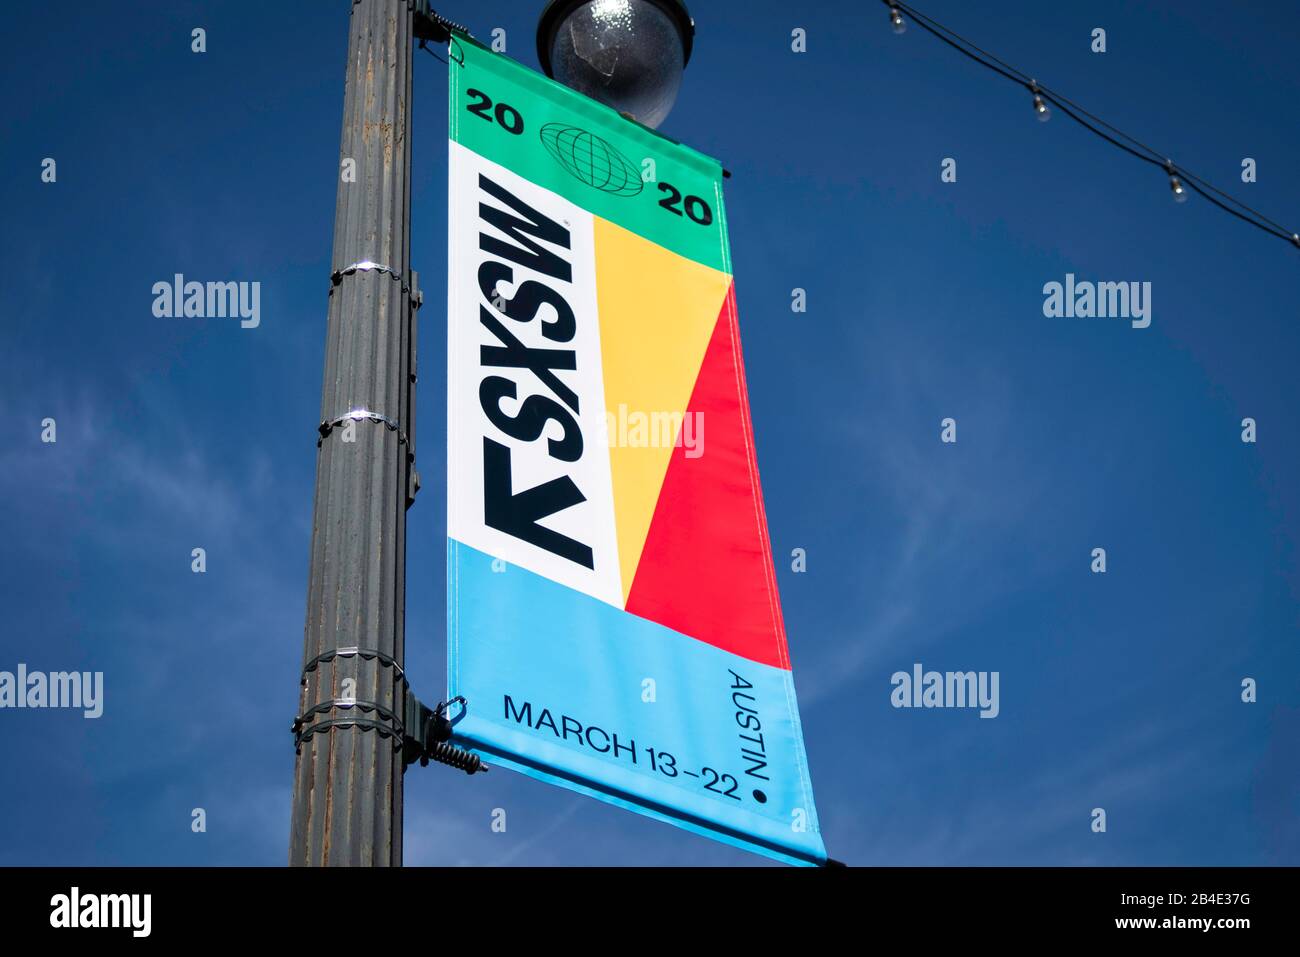 Austin, Texas - March 6, 2020: 2020 South by Southwest (SXSW) conference and festival banner in the Austin sky Stock Photo